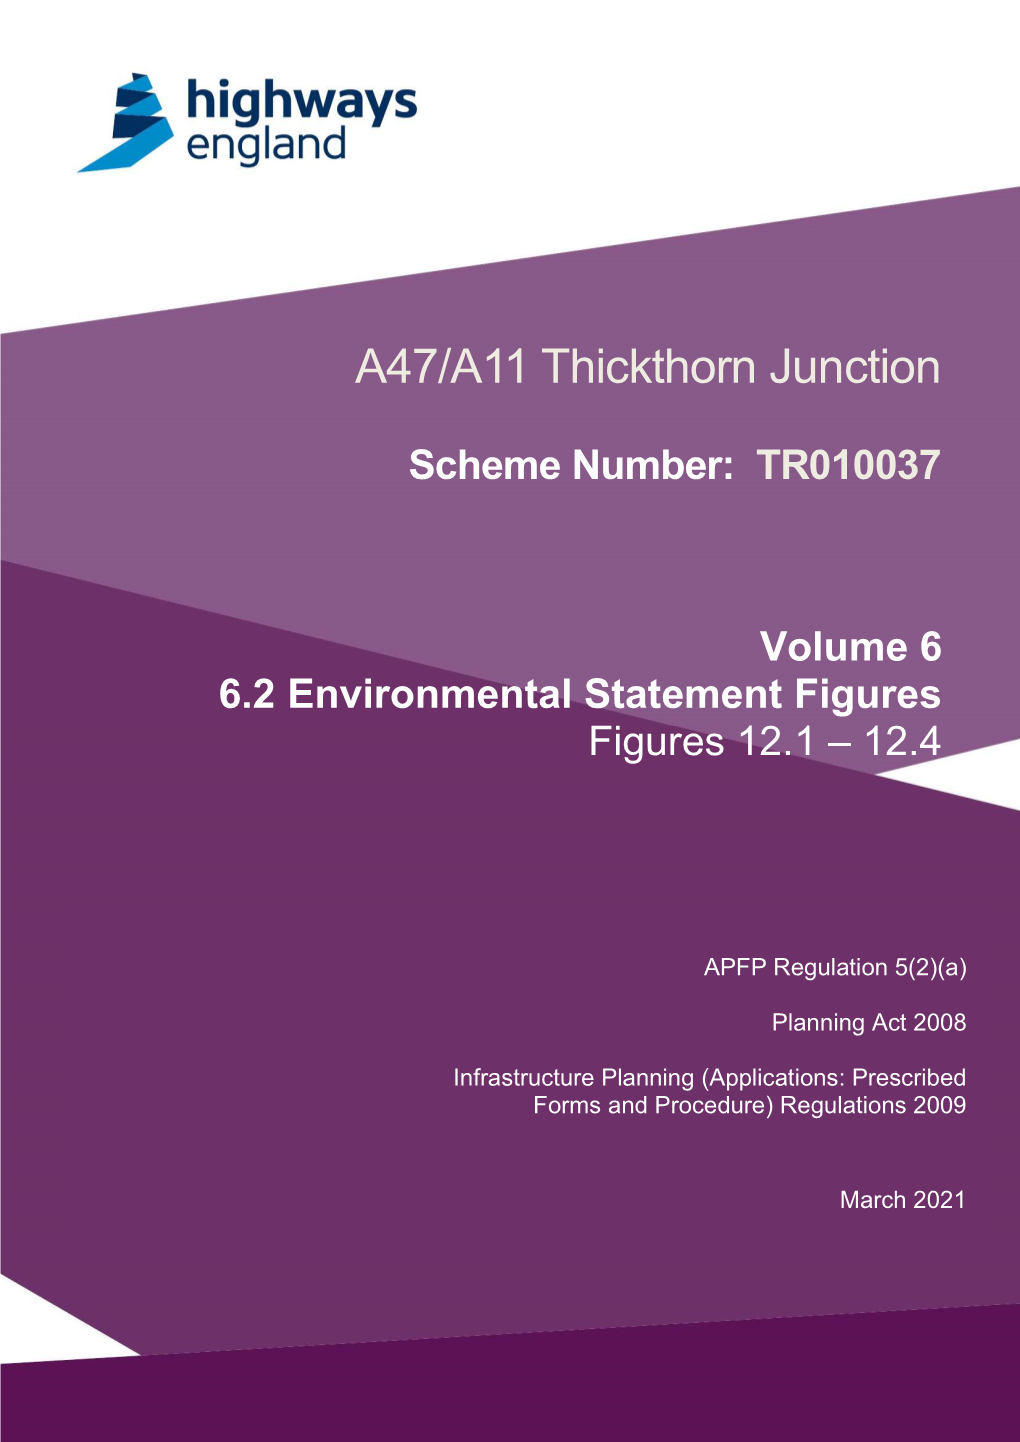 A47/A11 Thickthorn Junction Environmental Statement Figures